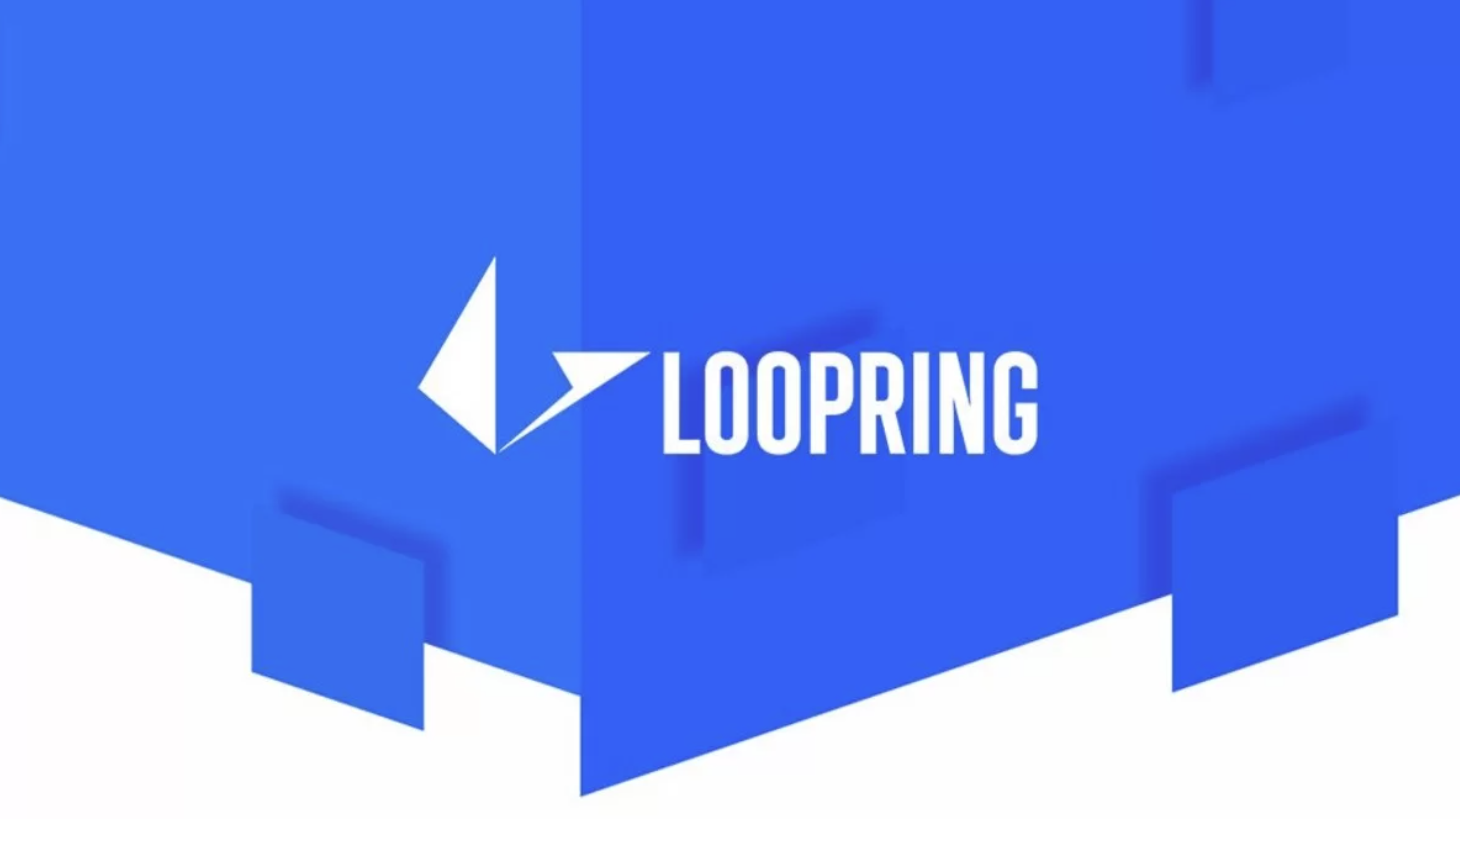 Where to Buy Loopring Coin?